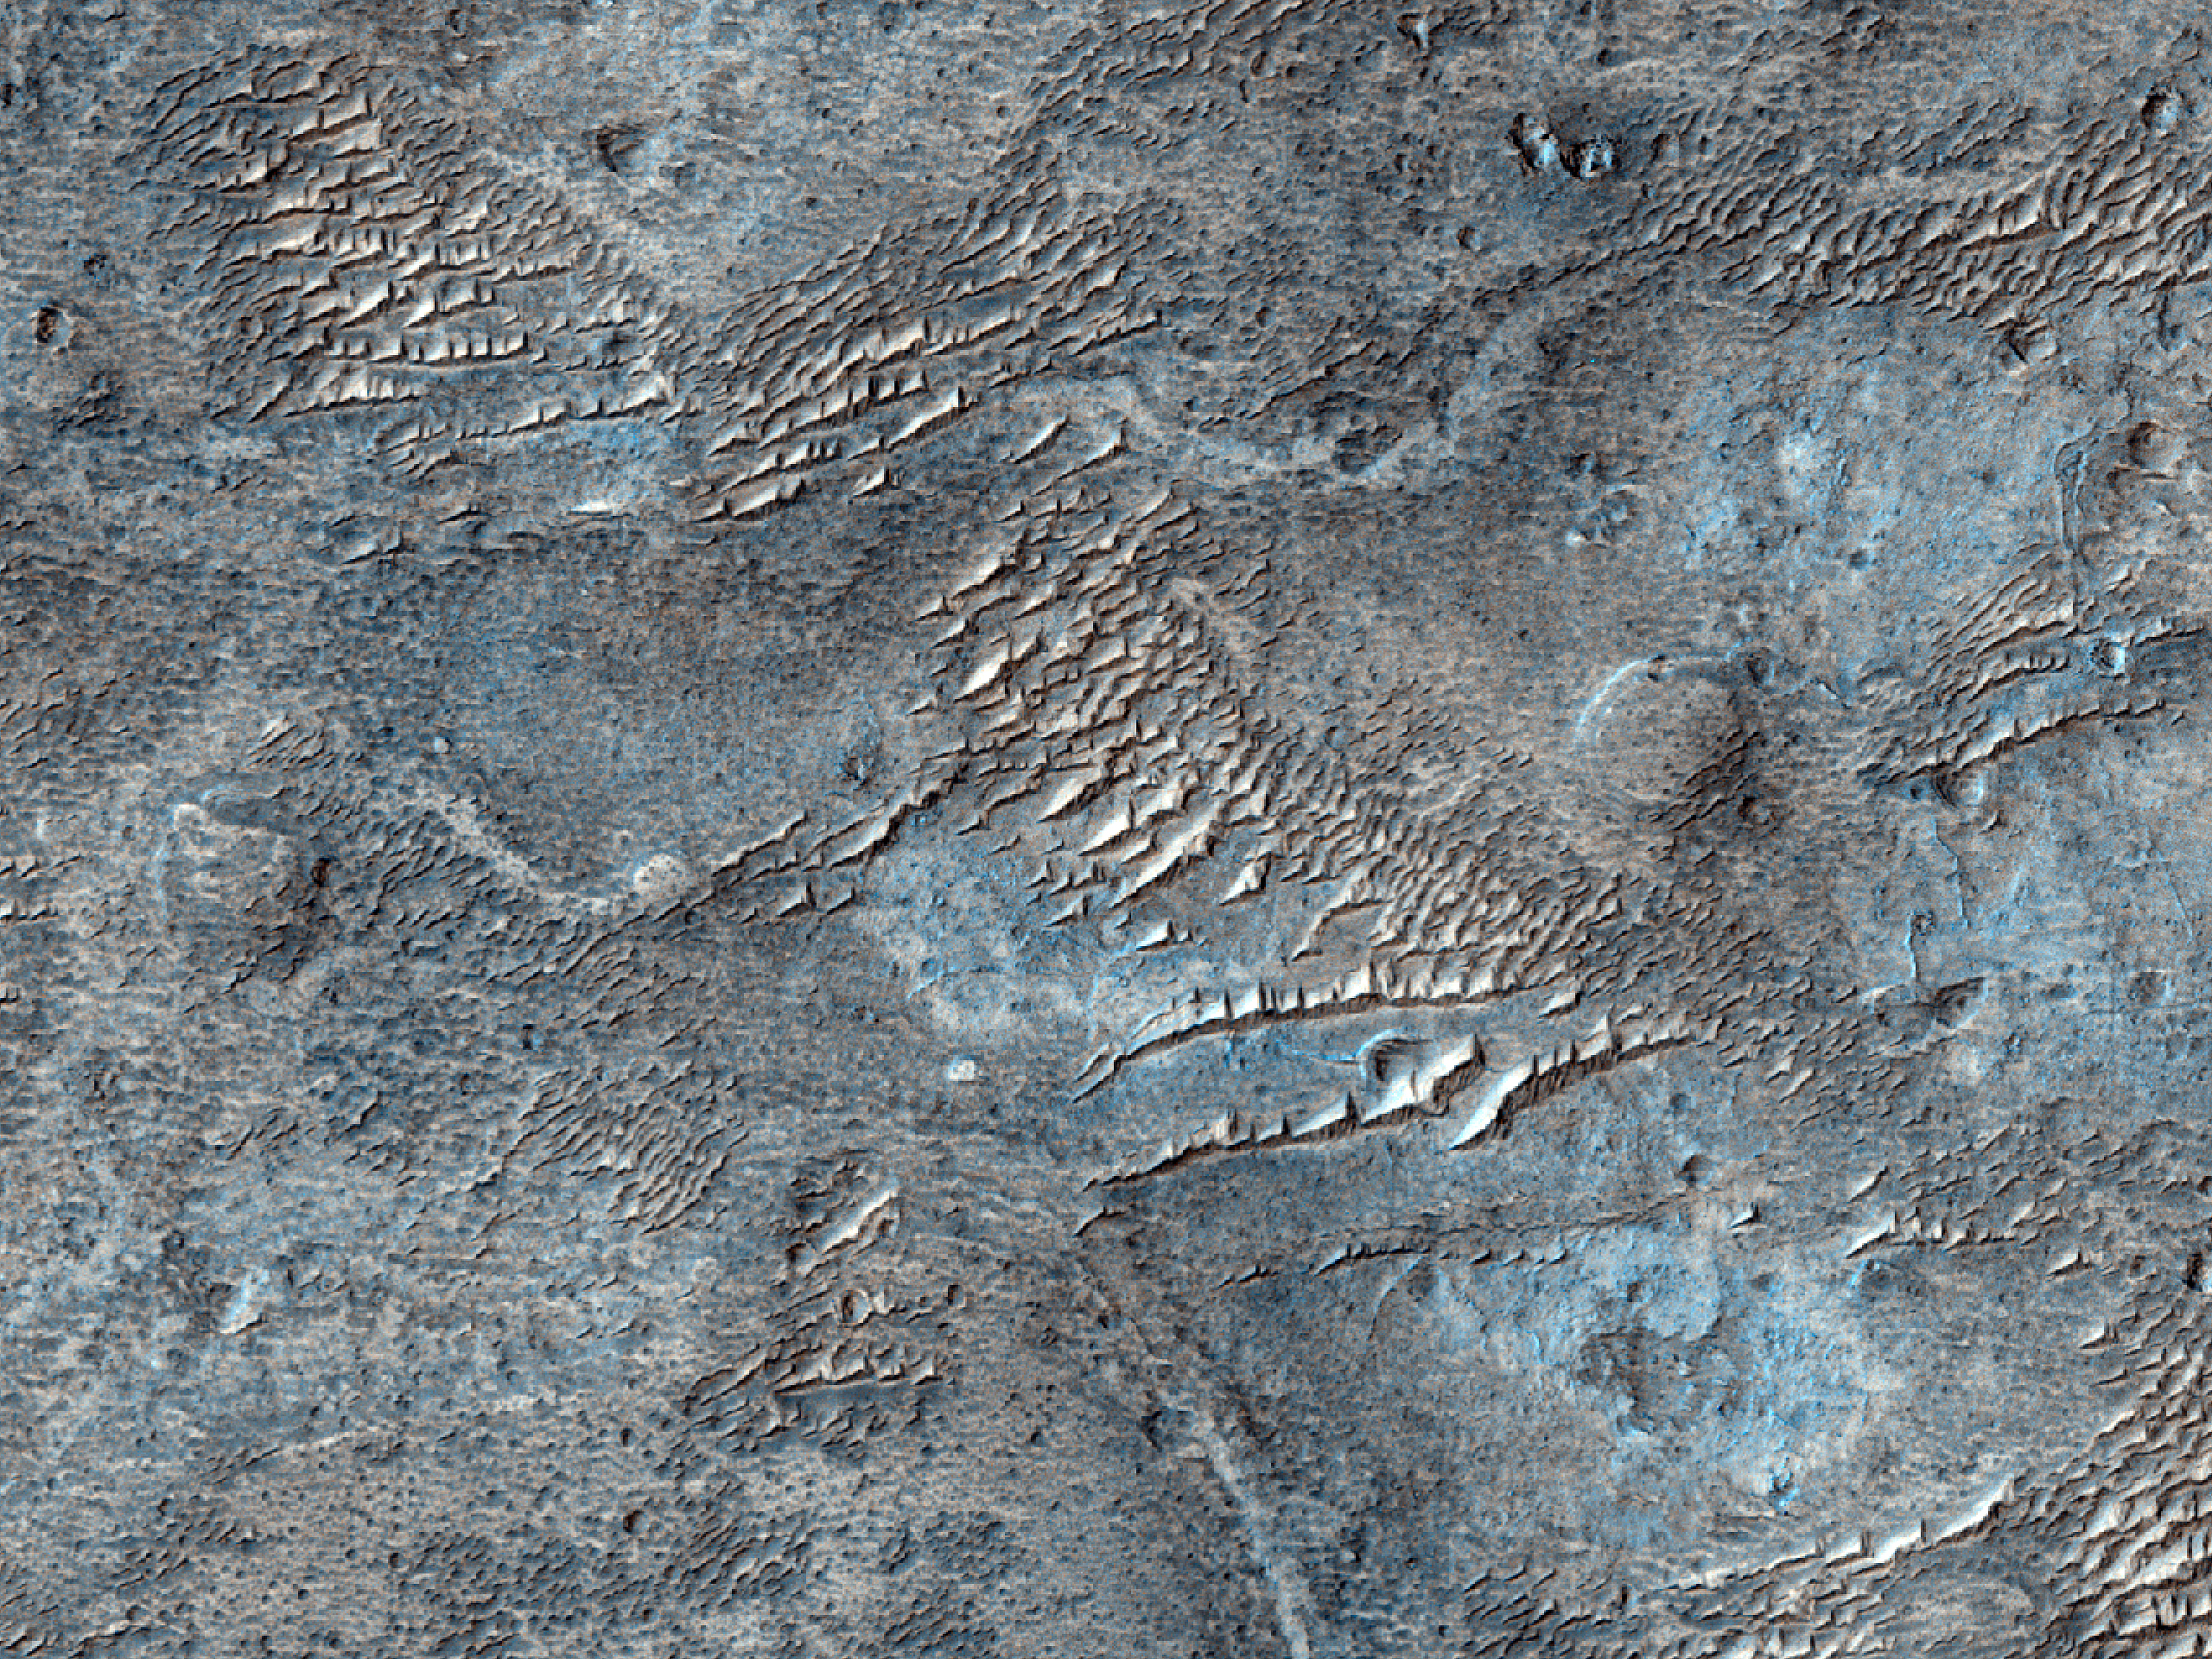 Exposed Material Southwest of an Impact Crater